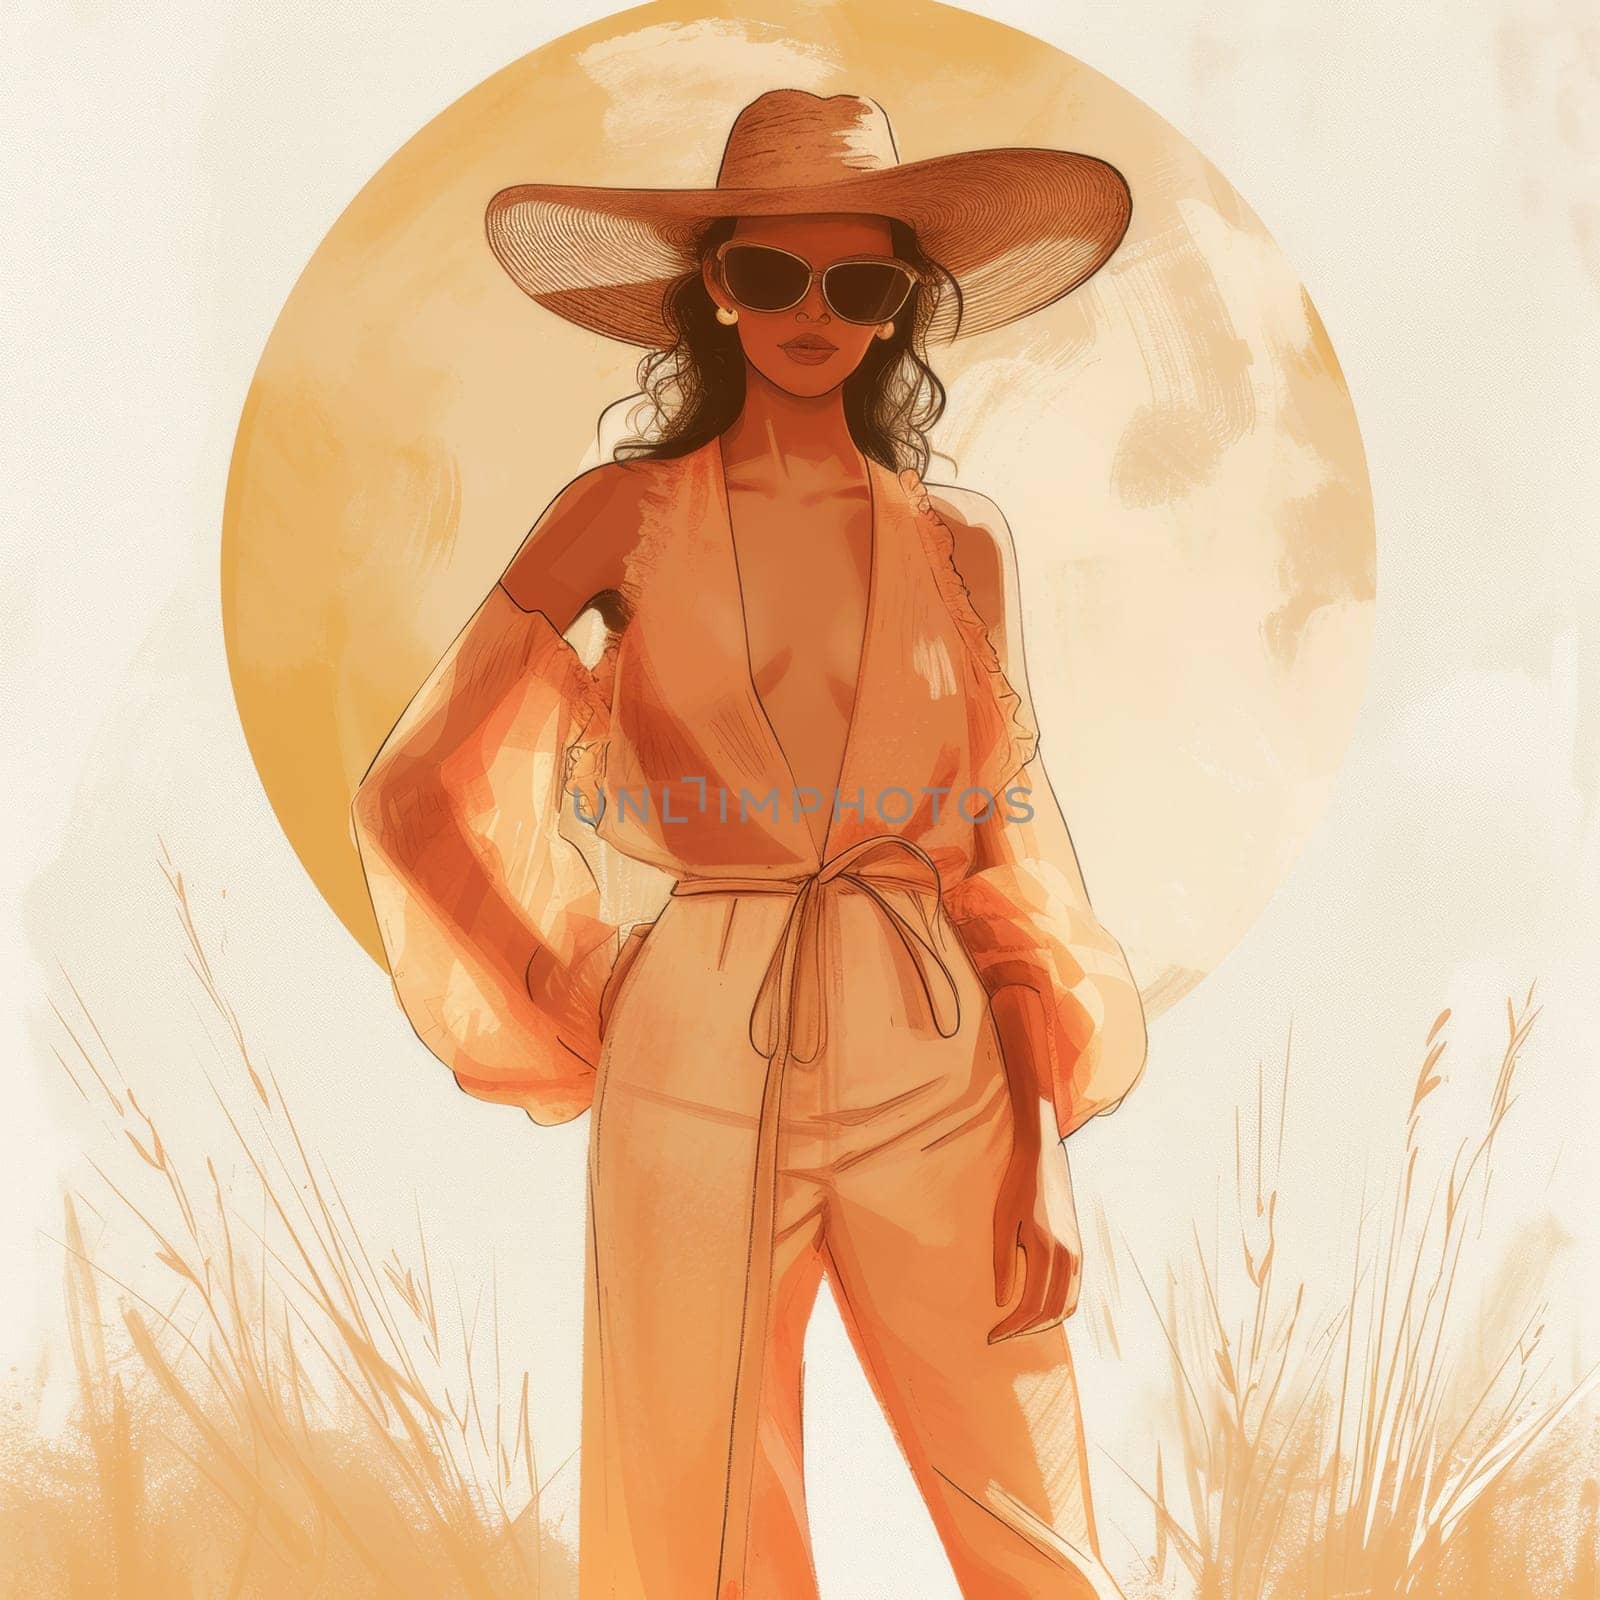 A woman in a hat and sunglasses standing next to the sun